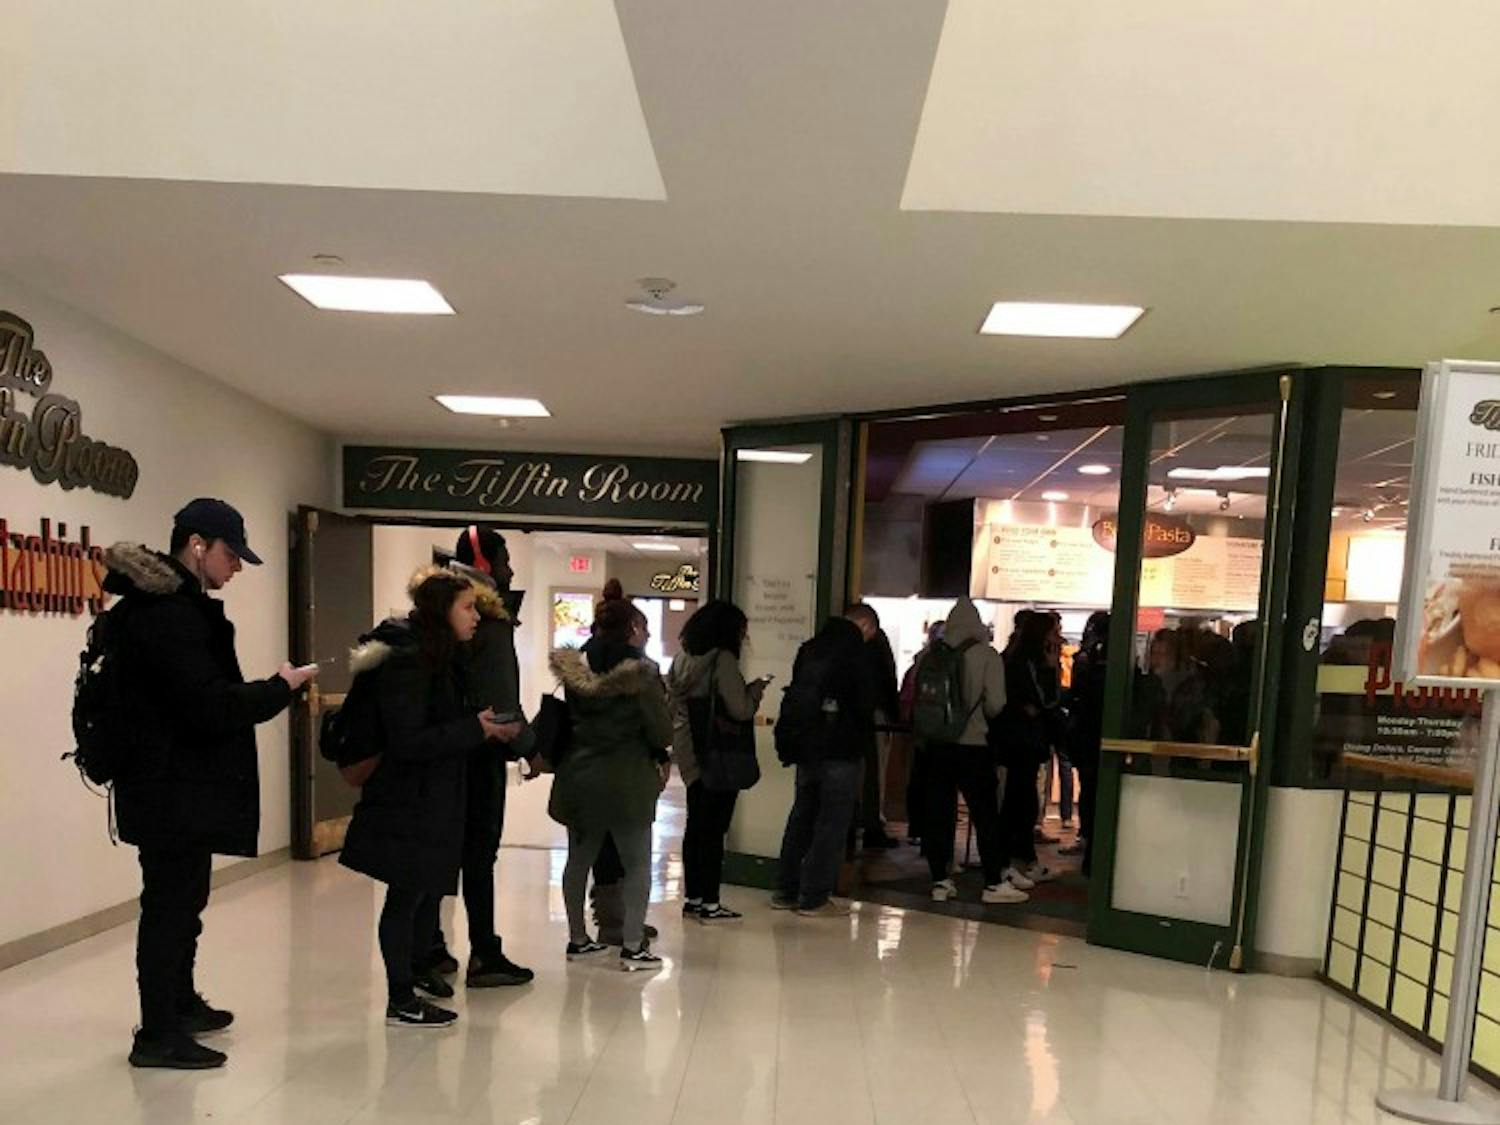 Students are found waiting in line from a half hour to an hour for Pistachio’s pasta, as the line usually stretches beyond the Pistachio’s doors at lunchtime.